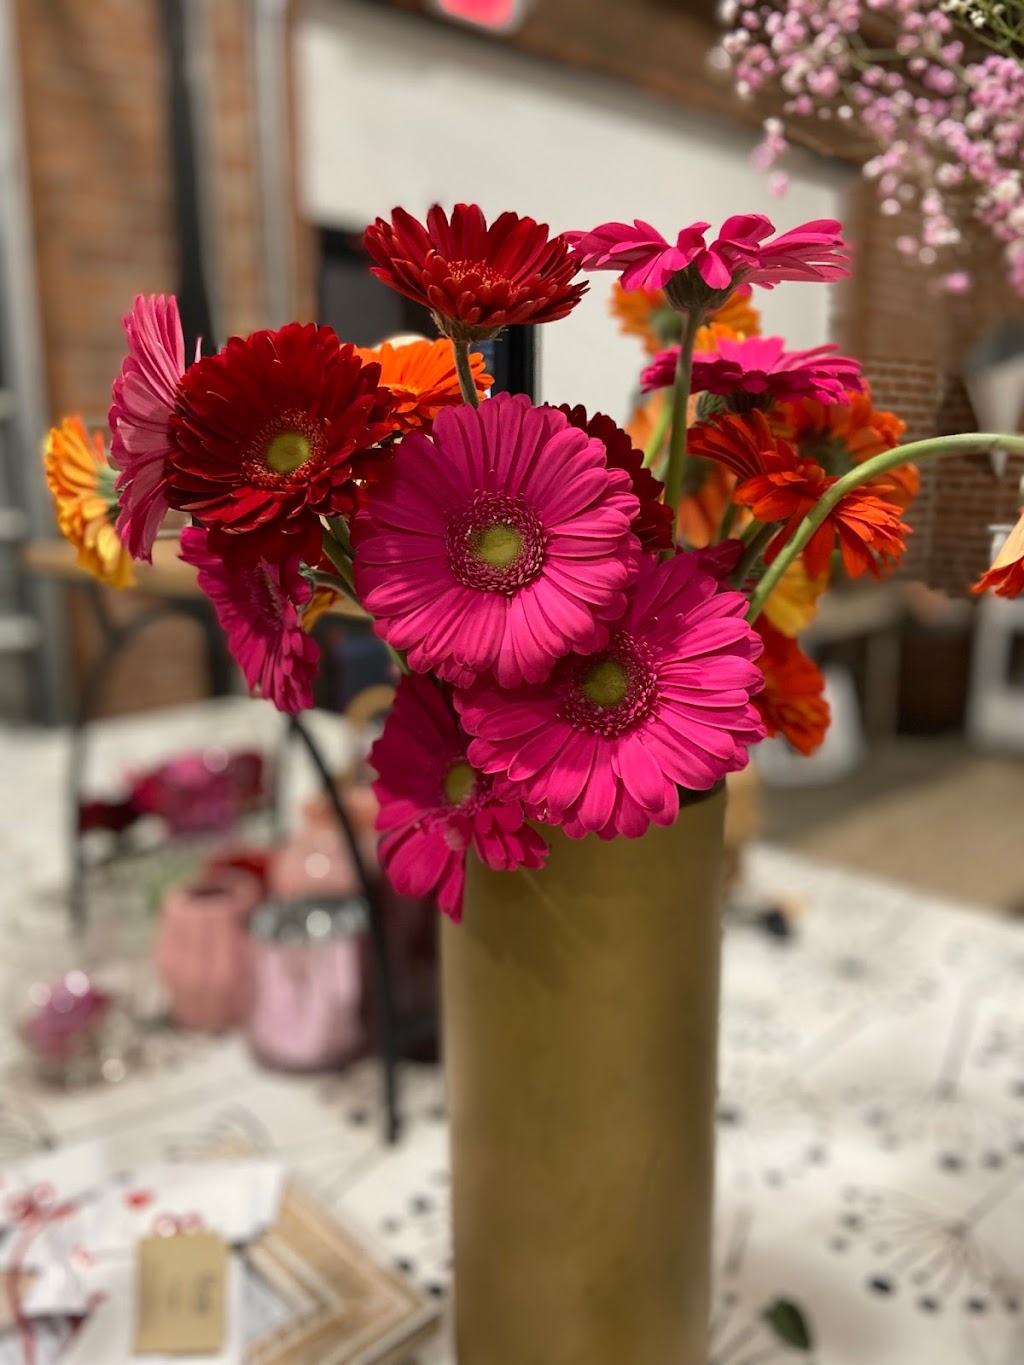 Blooms Flower Truck and Studio | 77 Mill St Unit 020, Westfield, MA 01085 | Phone: (413) 287-7996